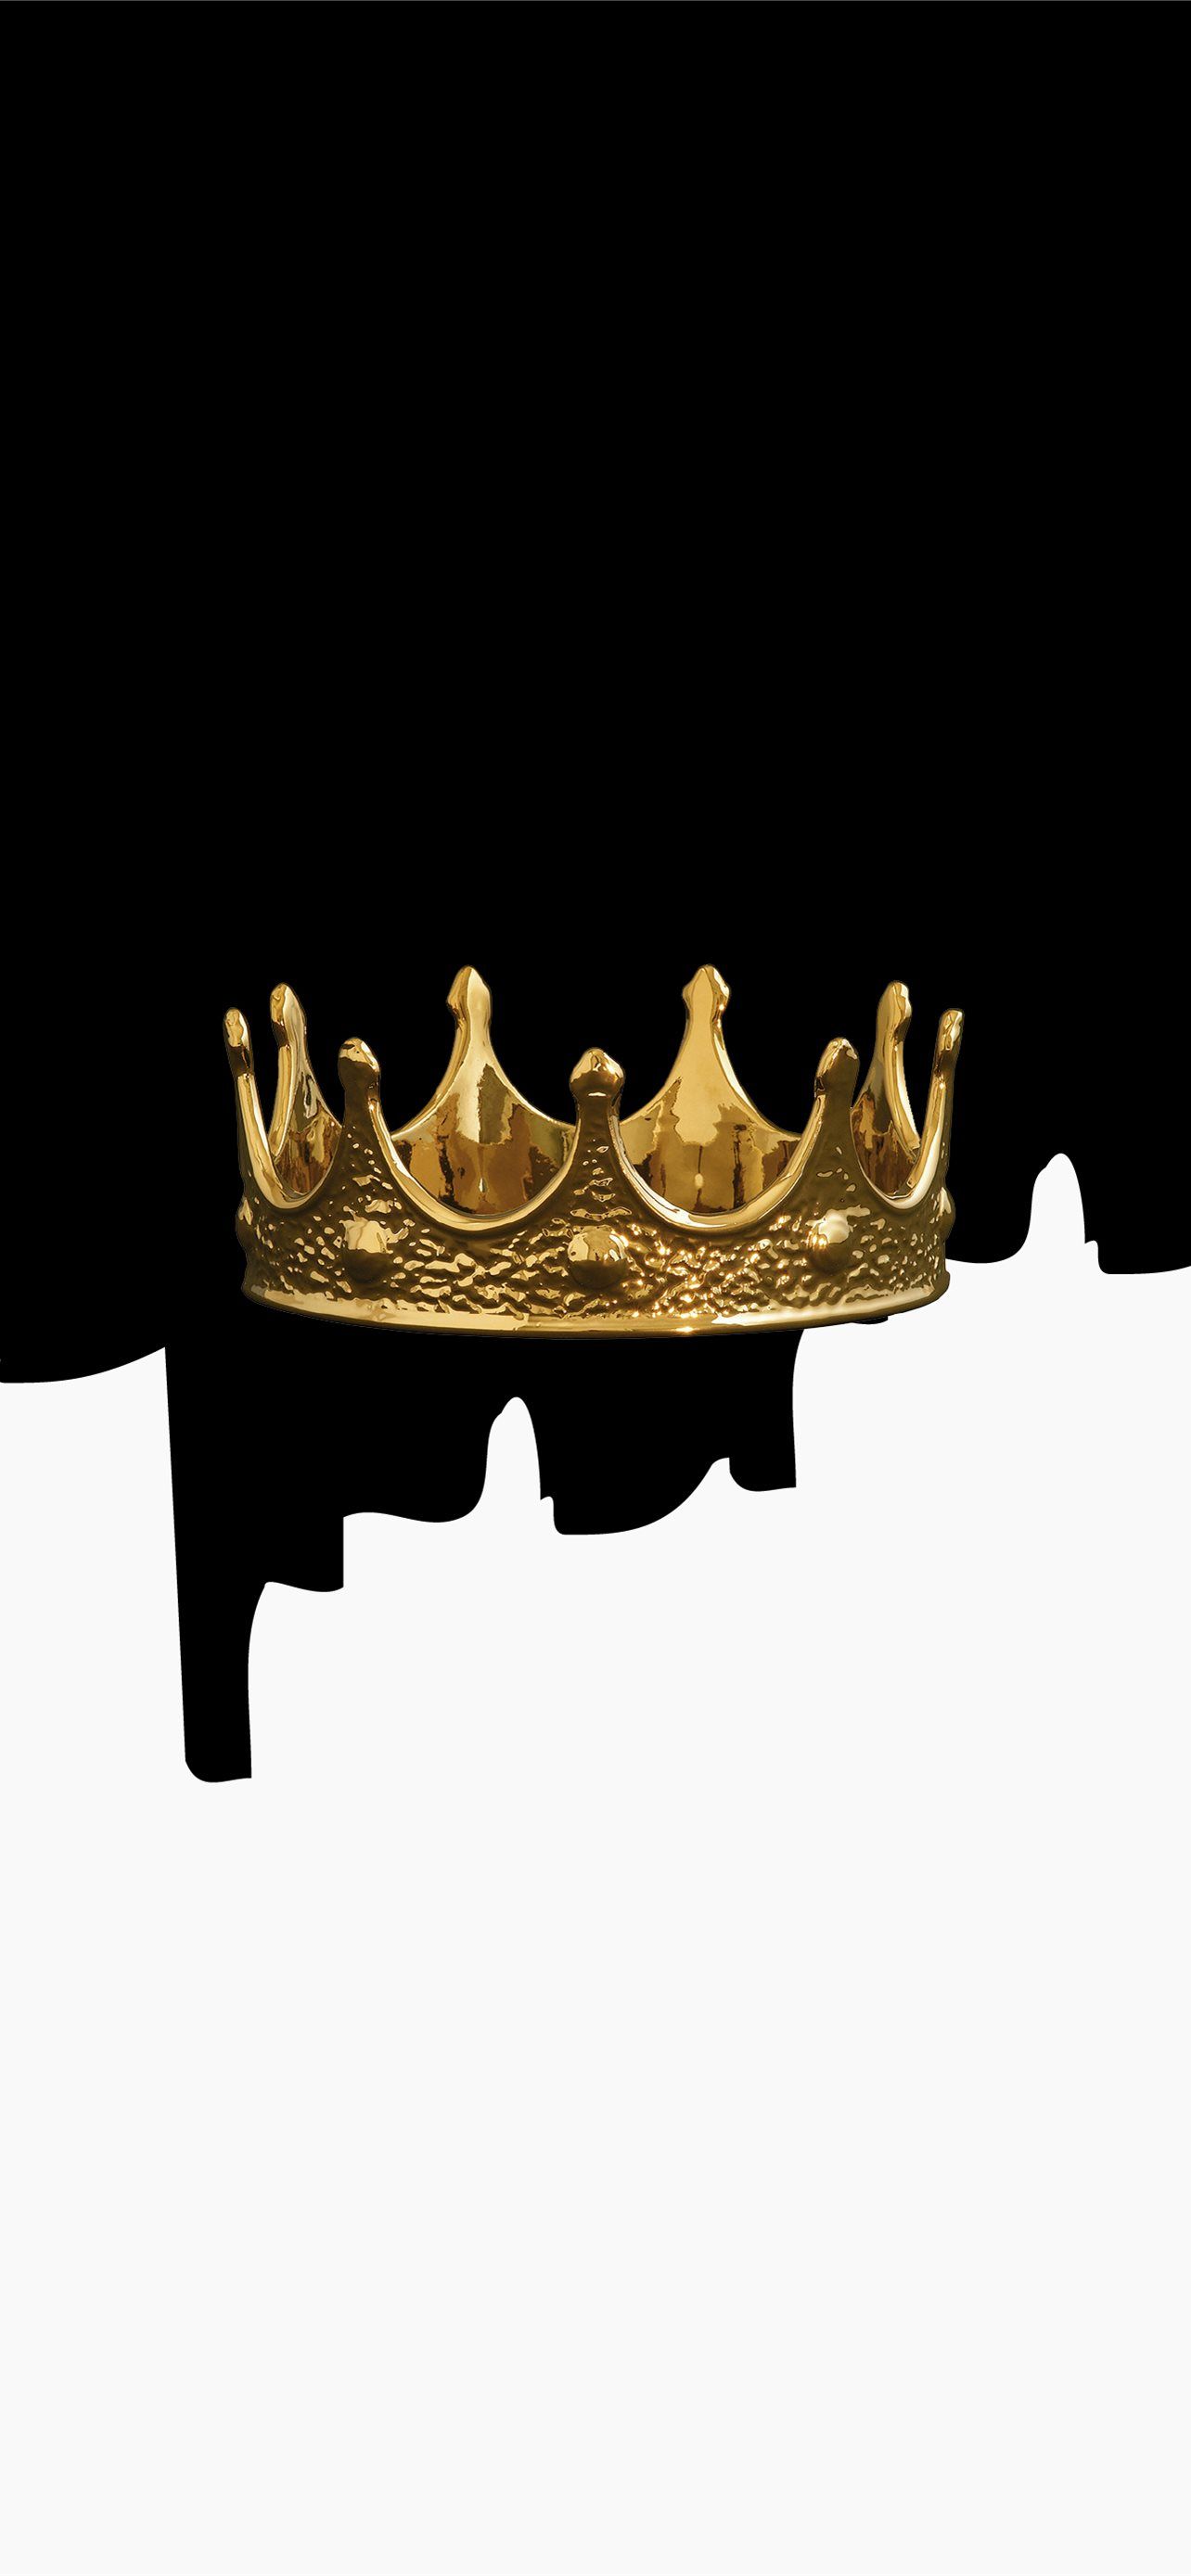 Best The crown iPhone HD Wallpaper